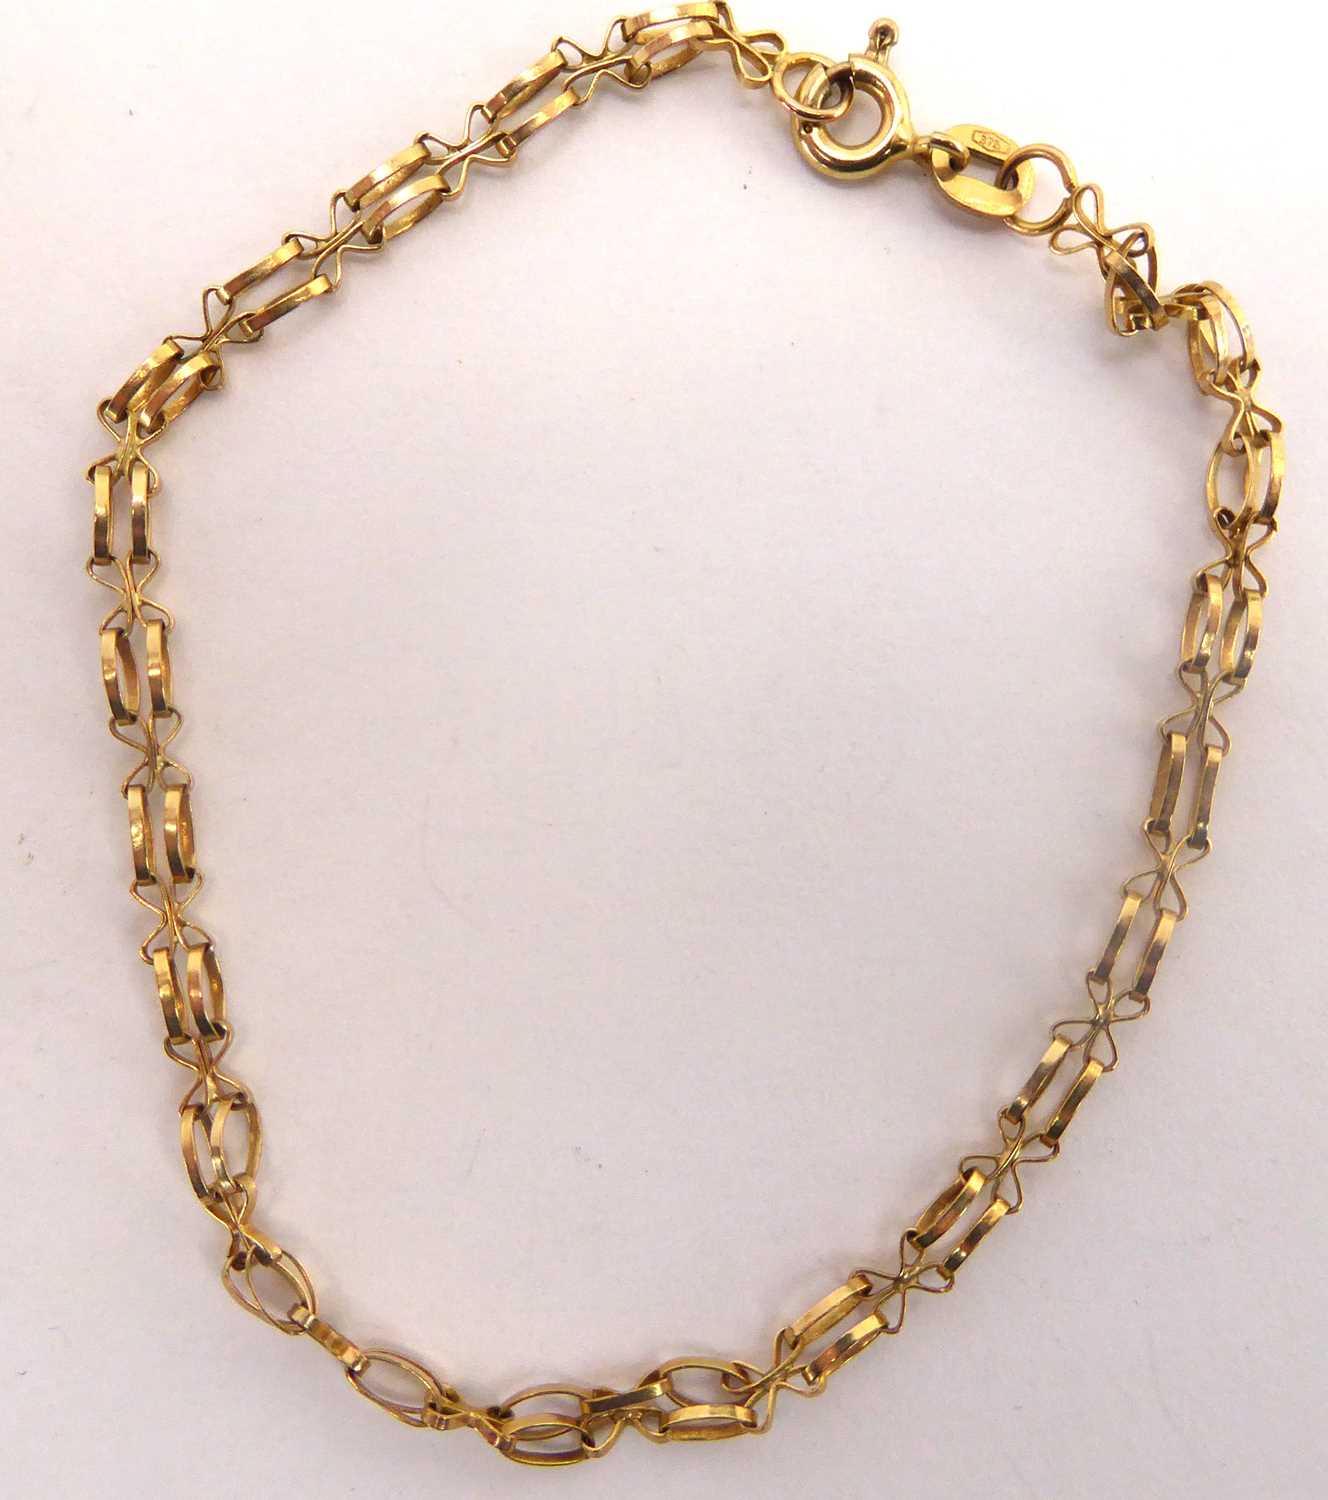 A 9ct gold dainty belcher style necklace with hoop clasp, length 82cm and a 9ct gold bracelet,